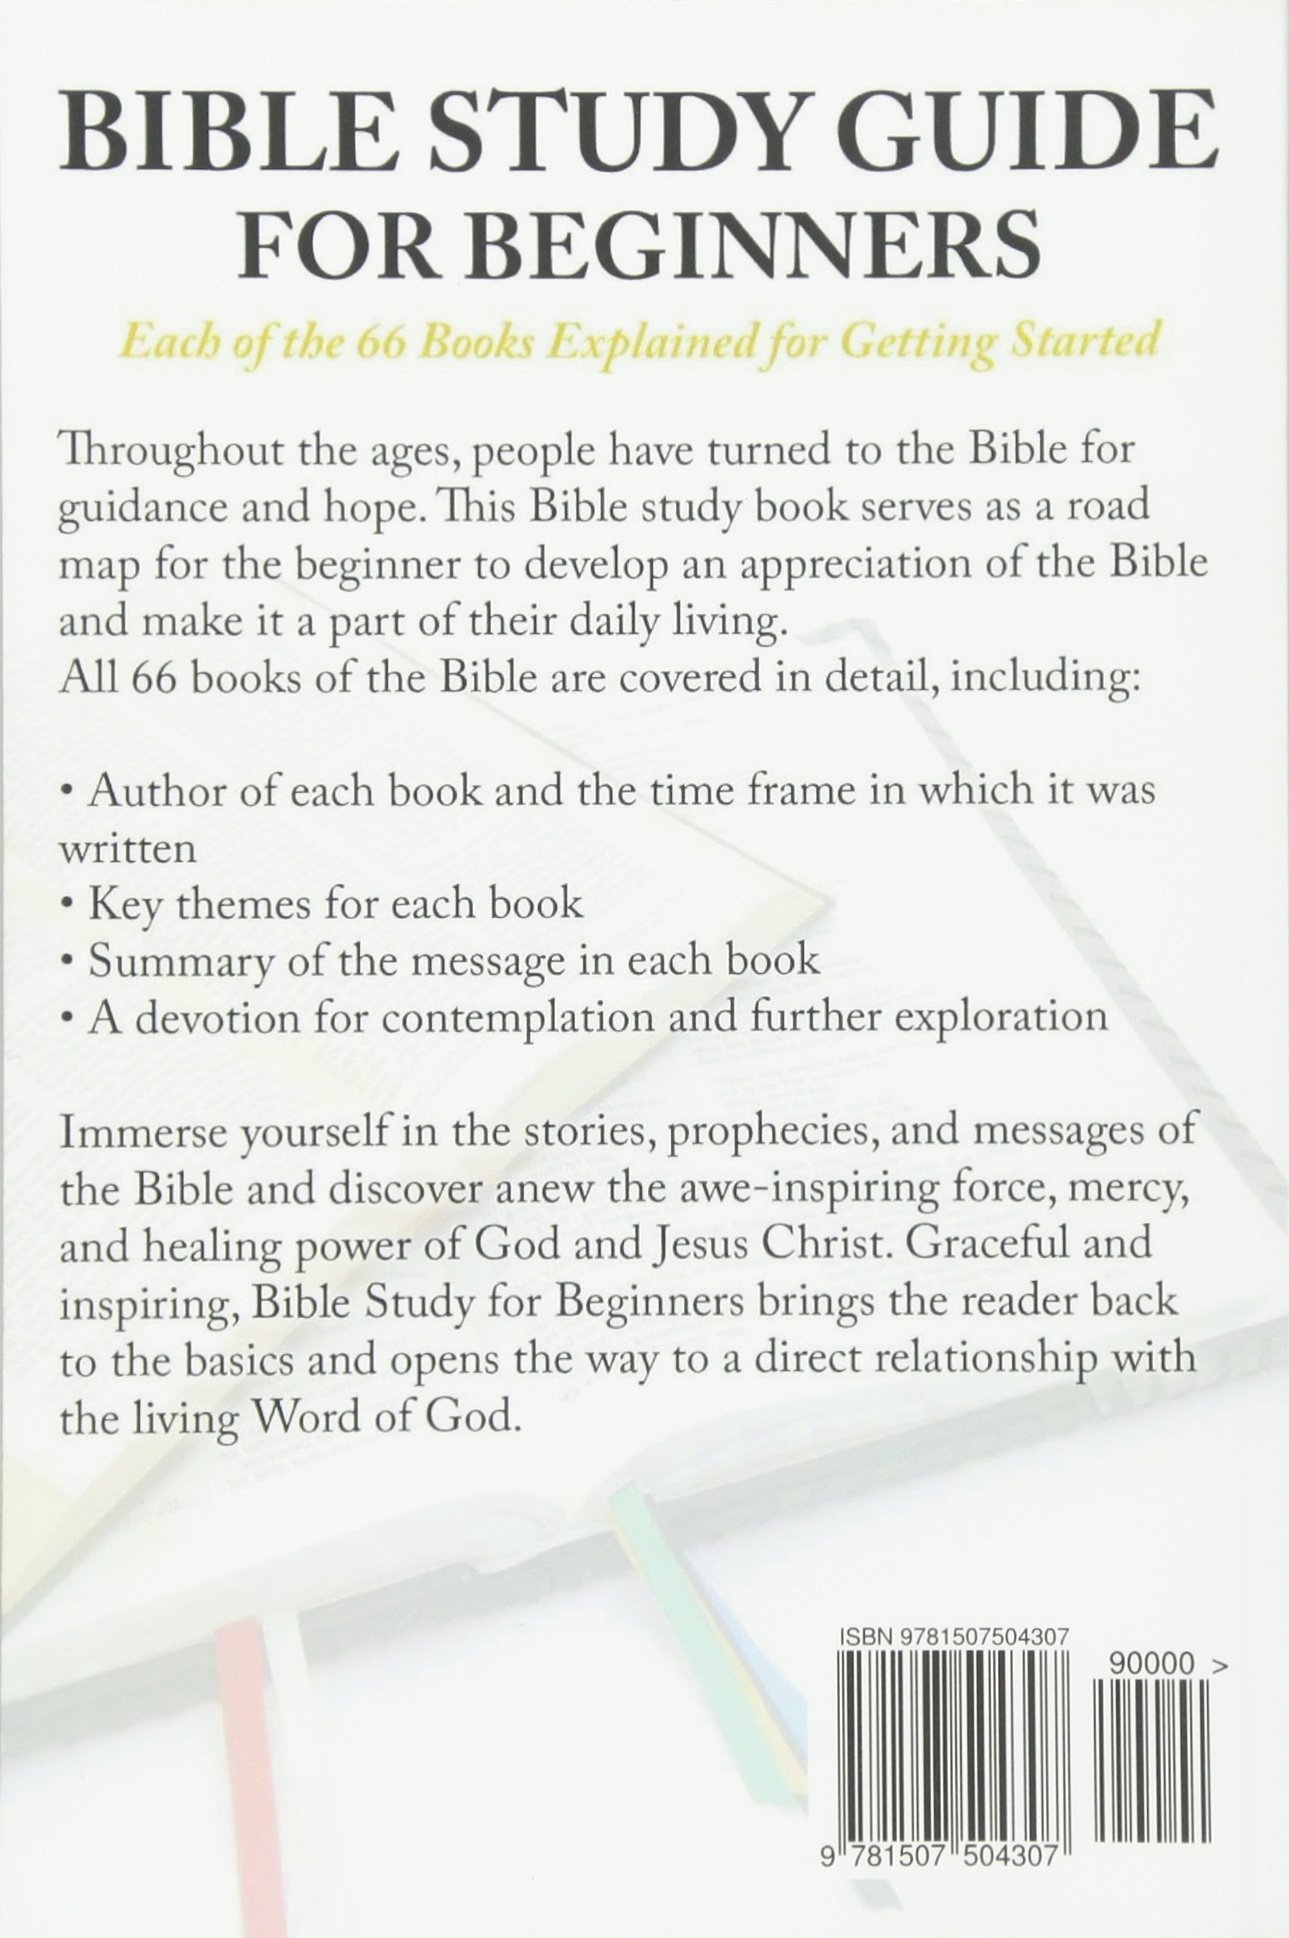 How to Bible Study For Beginners